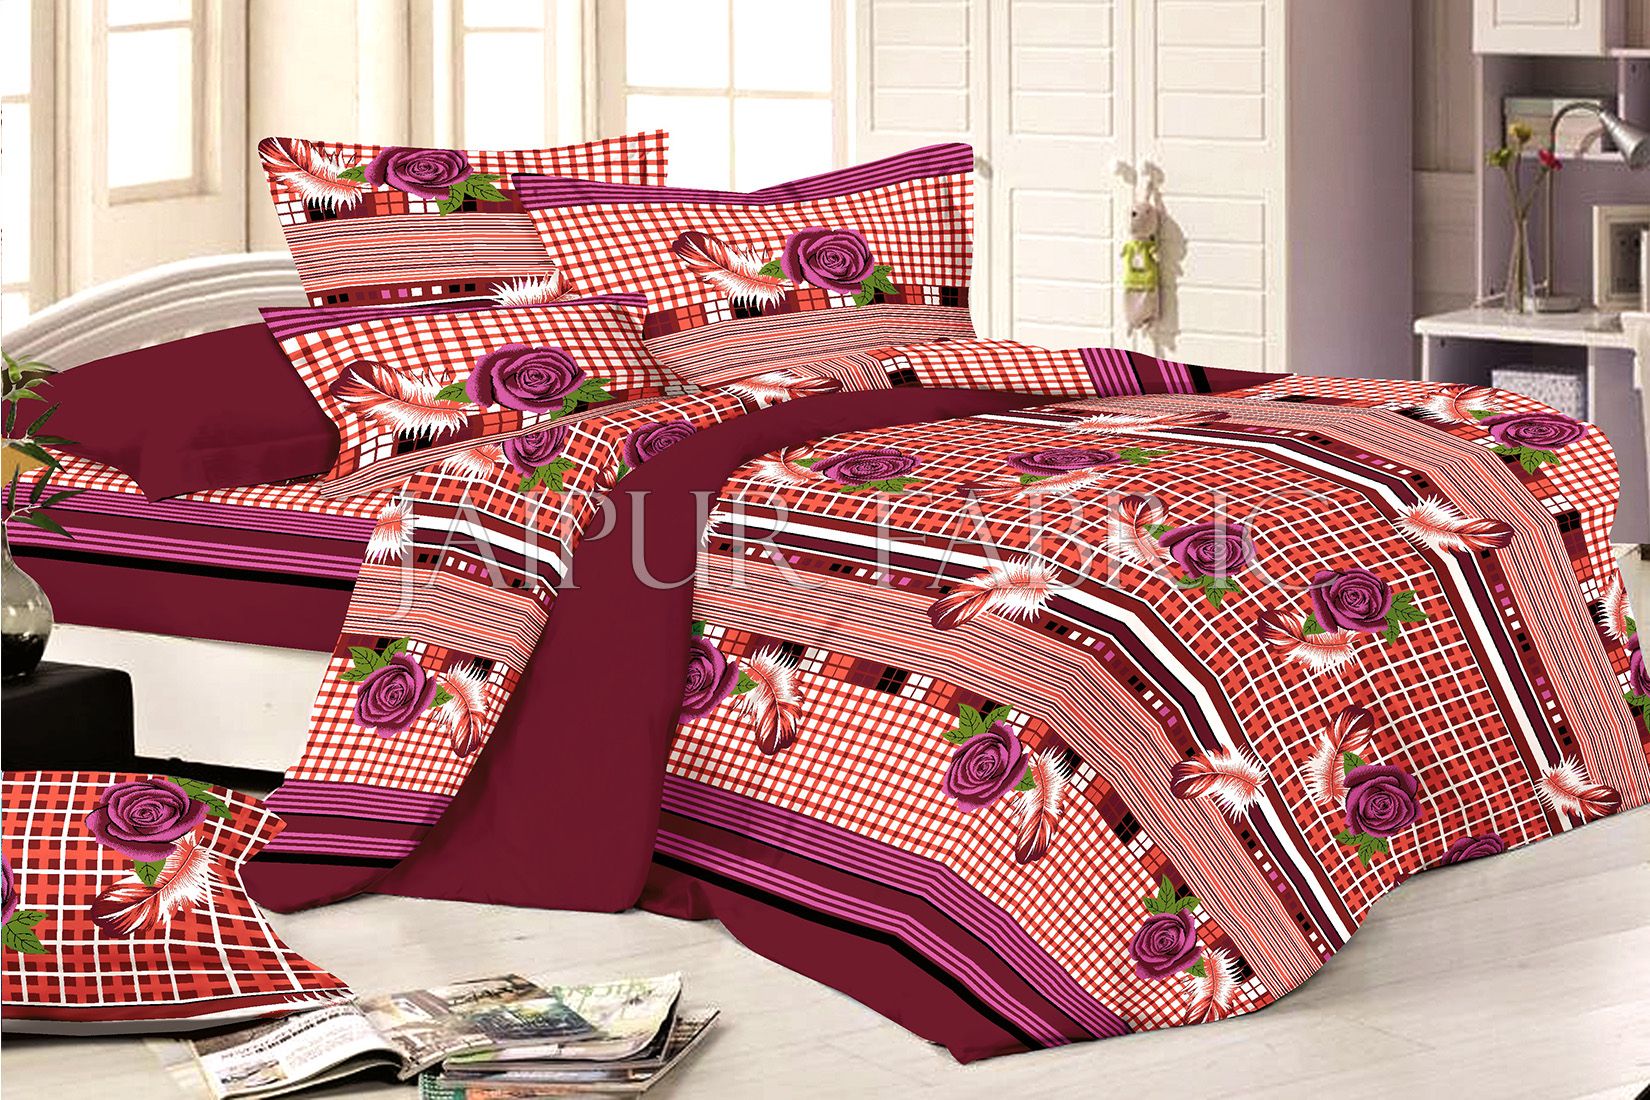 Maroon Base Flower and Feather Print Single Bed Sheet